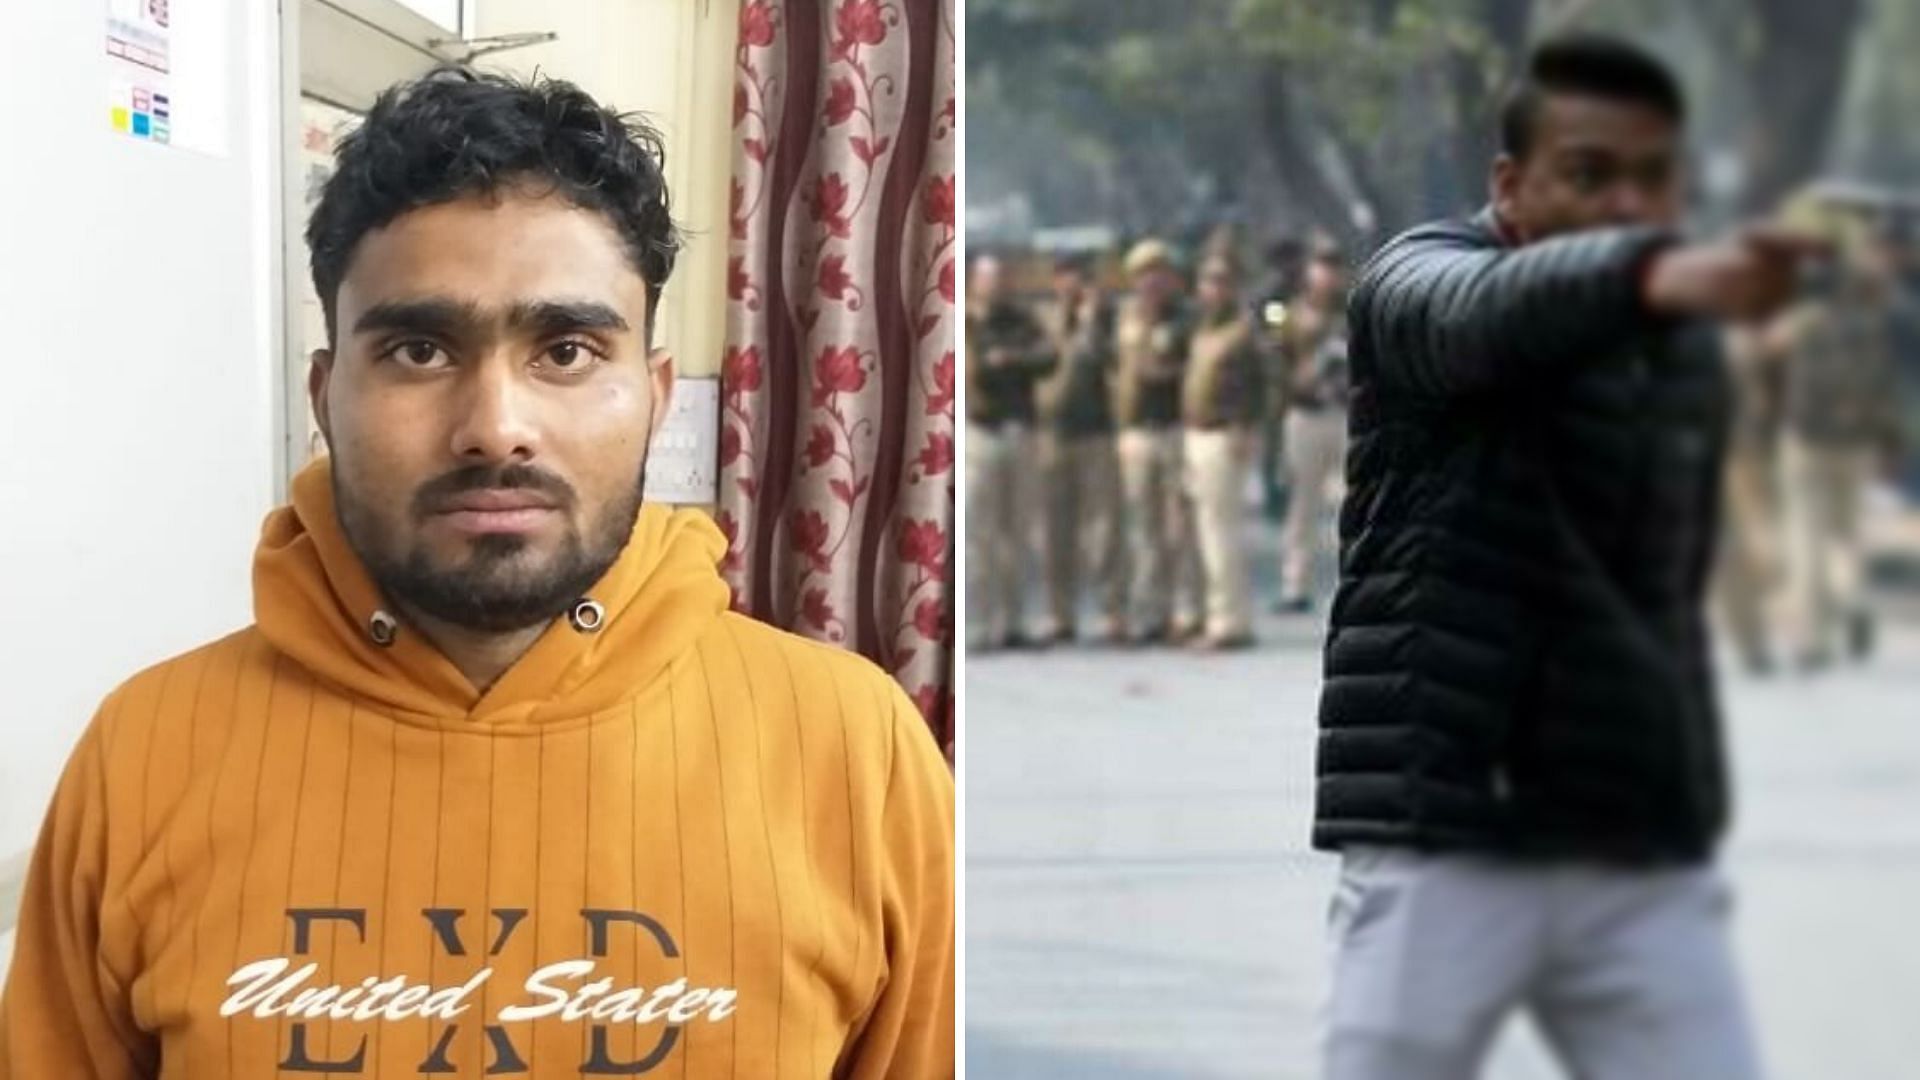 Ajit (left) has been arrested for allegedly supplying a gun to the man involved in Jamia shooting.